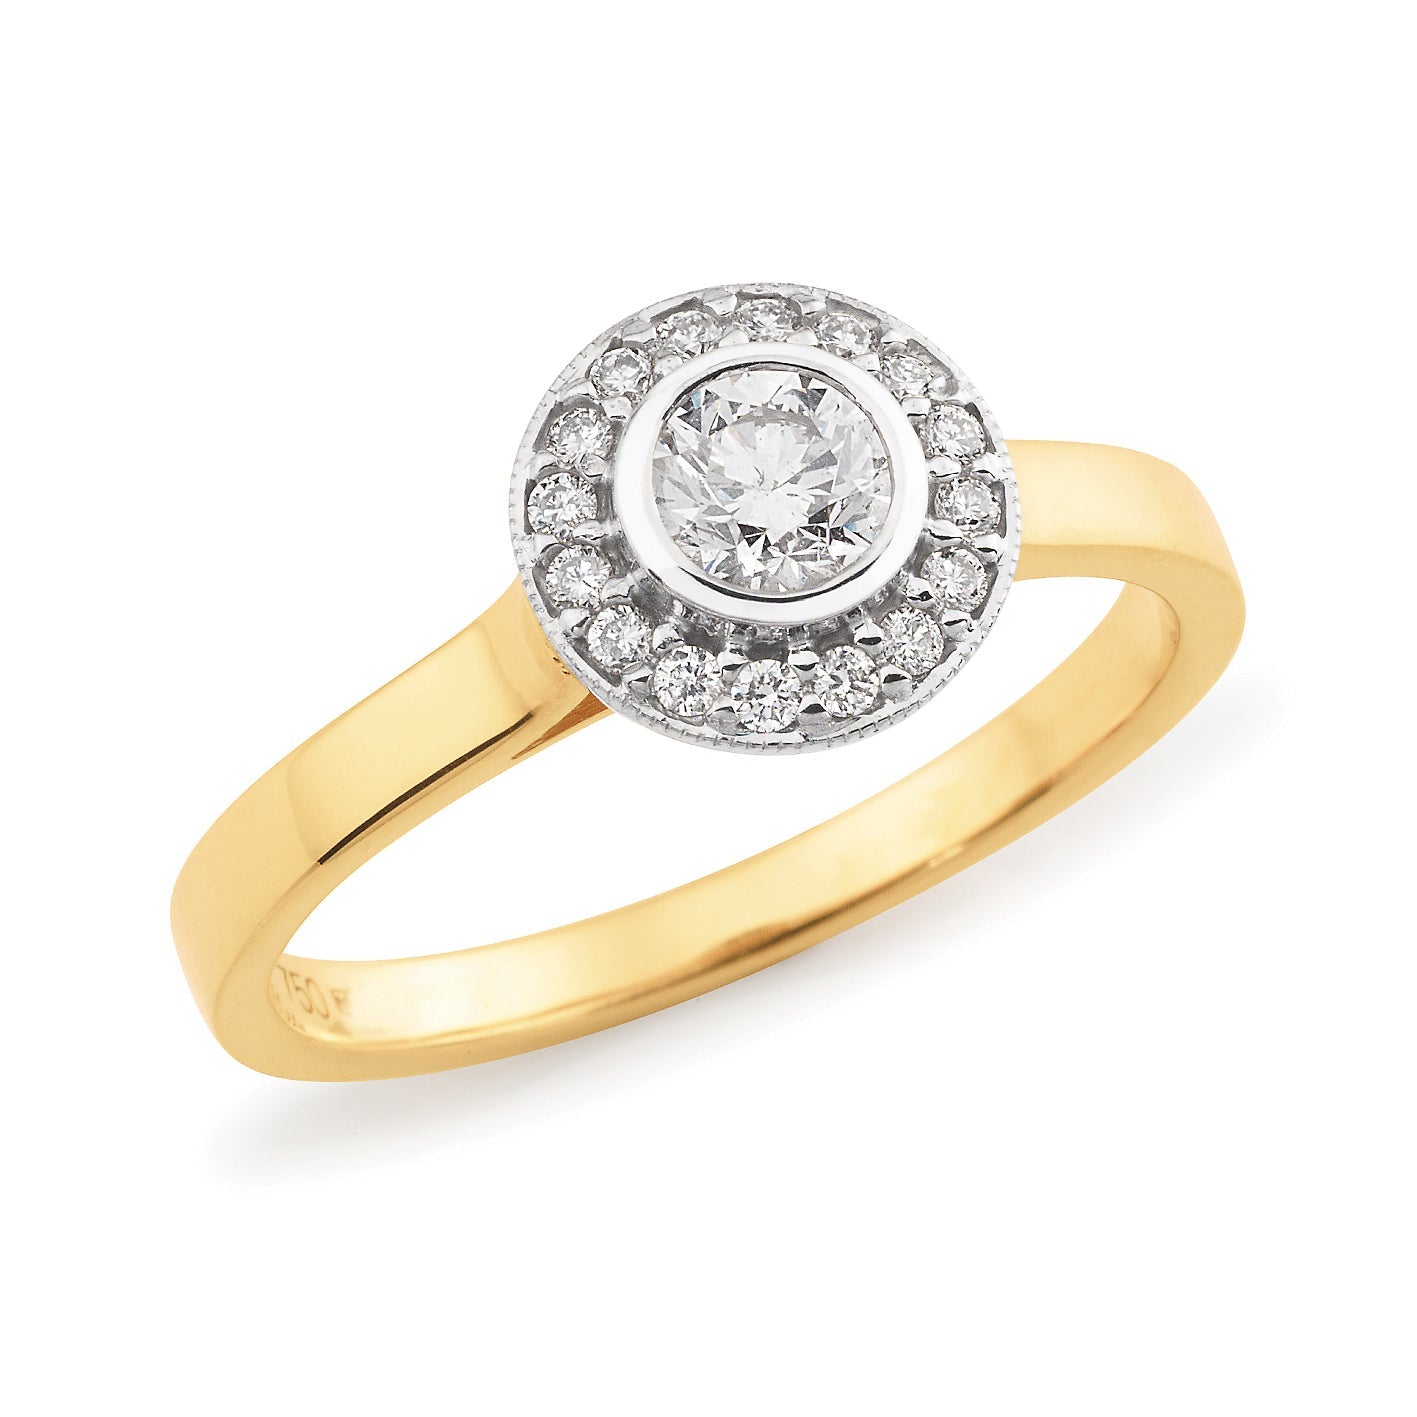 Diamond Set Halo Engagement Ring in 18ct Yellow & White Gold